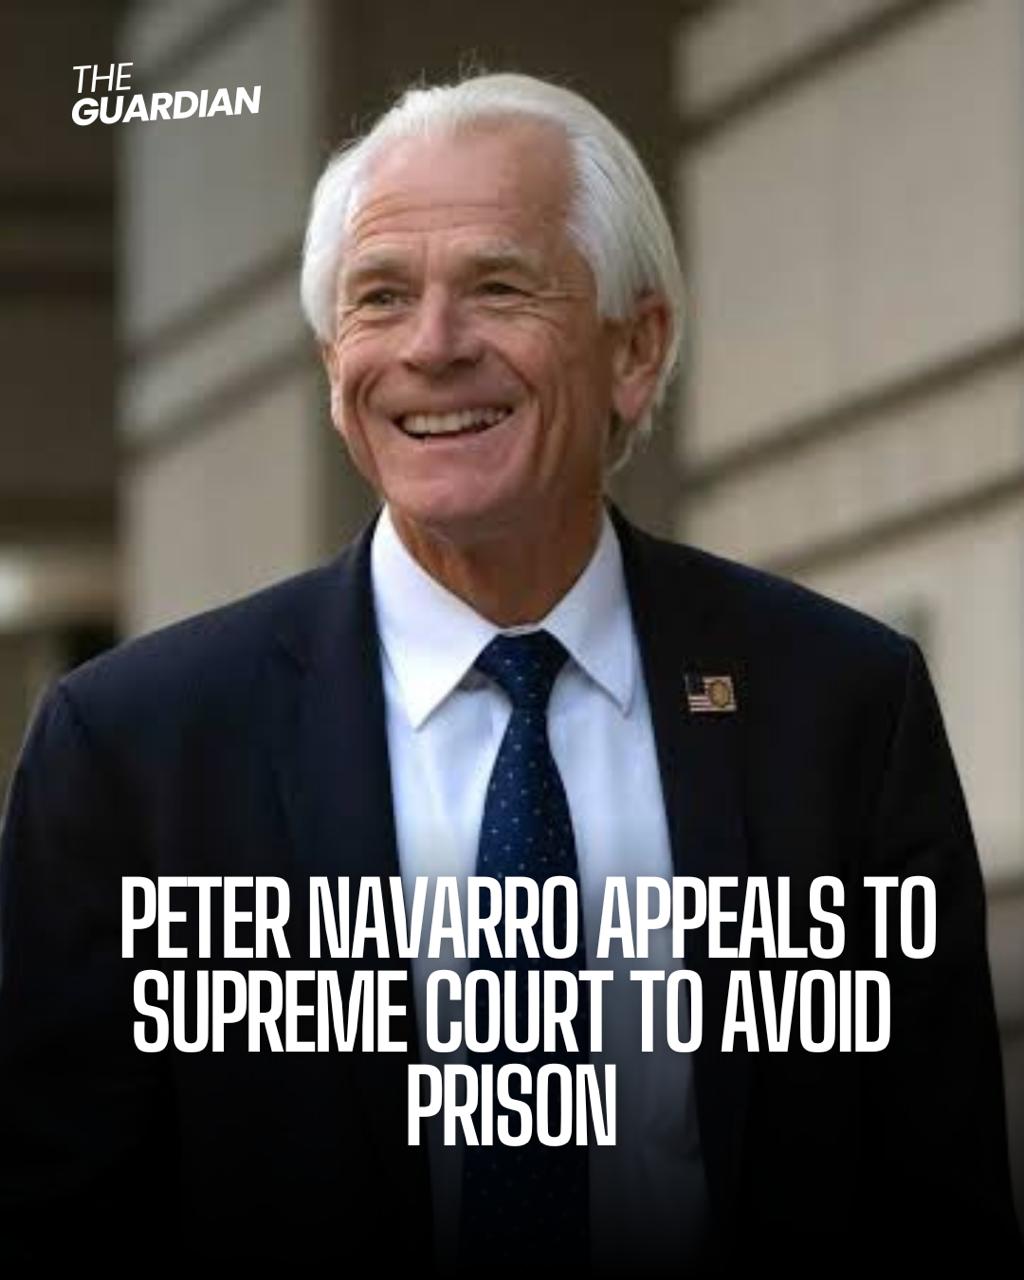 Peter Navarro demanded his conviction for contempt from Congress after he declined to unite with the January 6 House investigation.